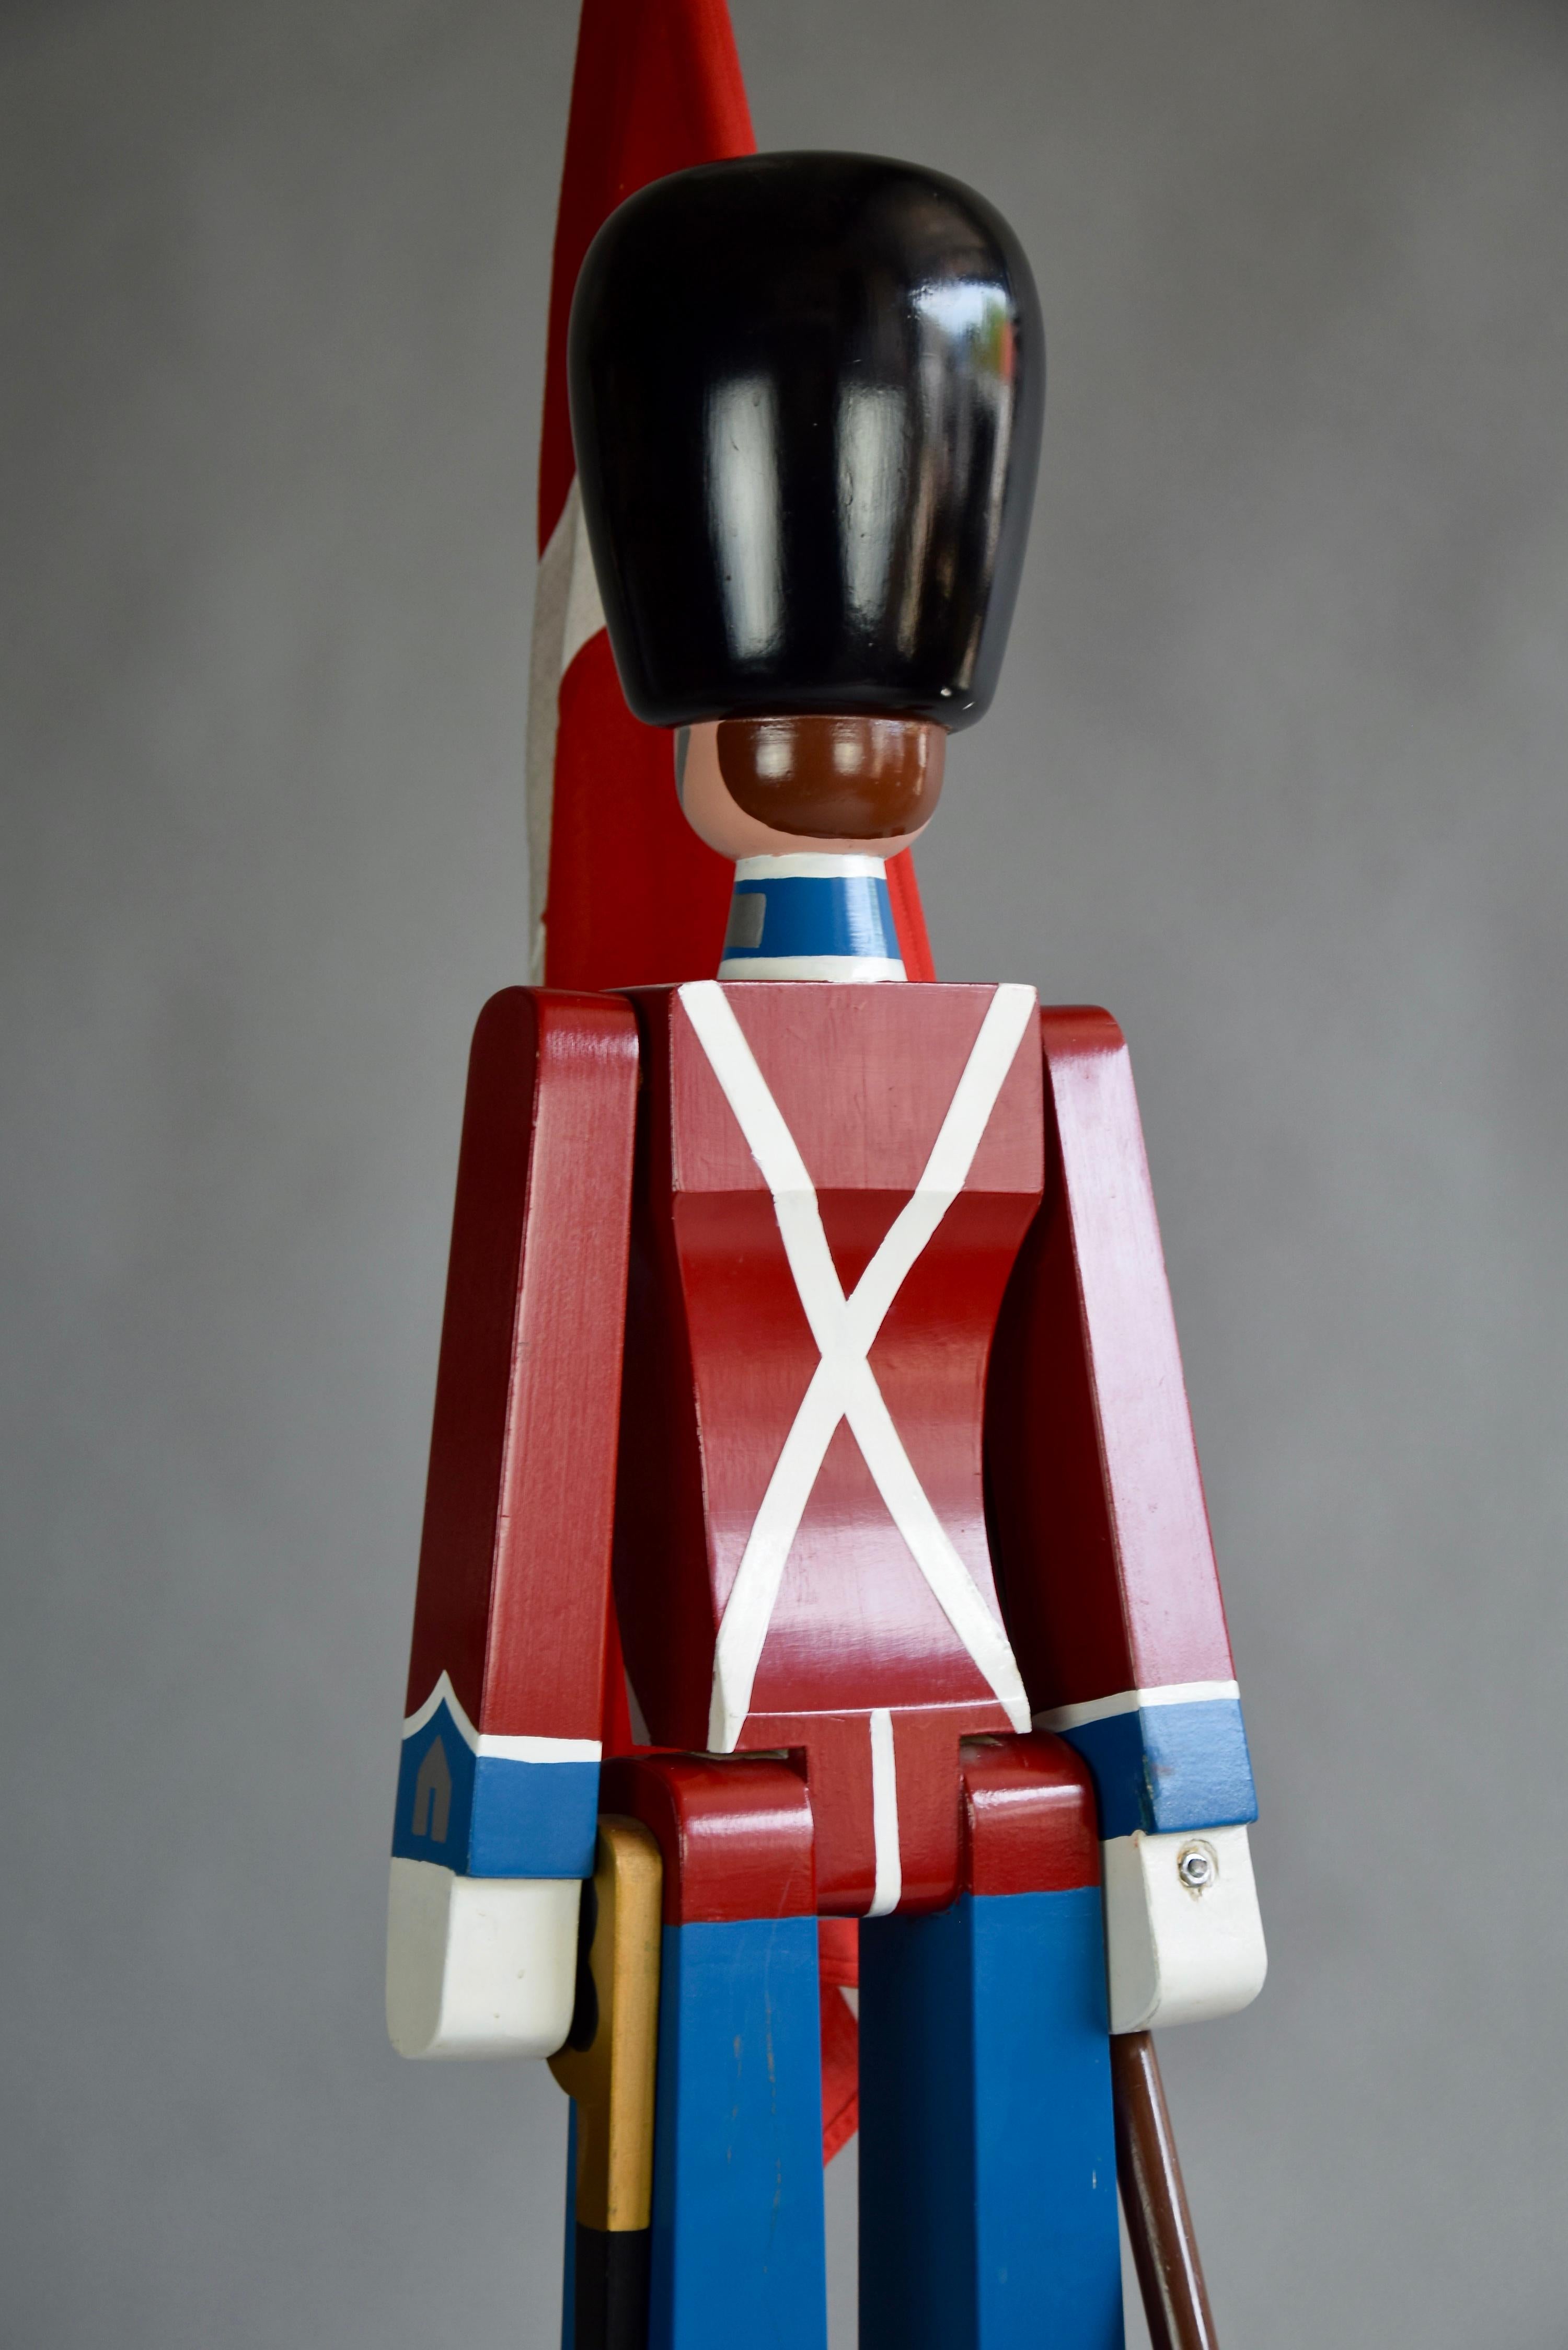 Giant-Sized King's Guardsman by Kay Bojesen For Sale 5